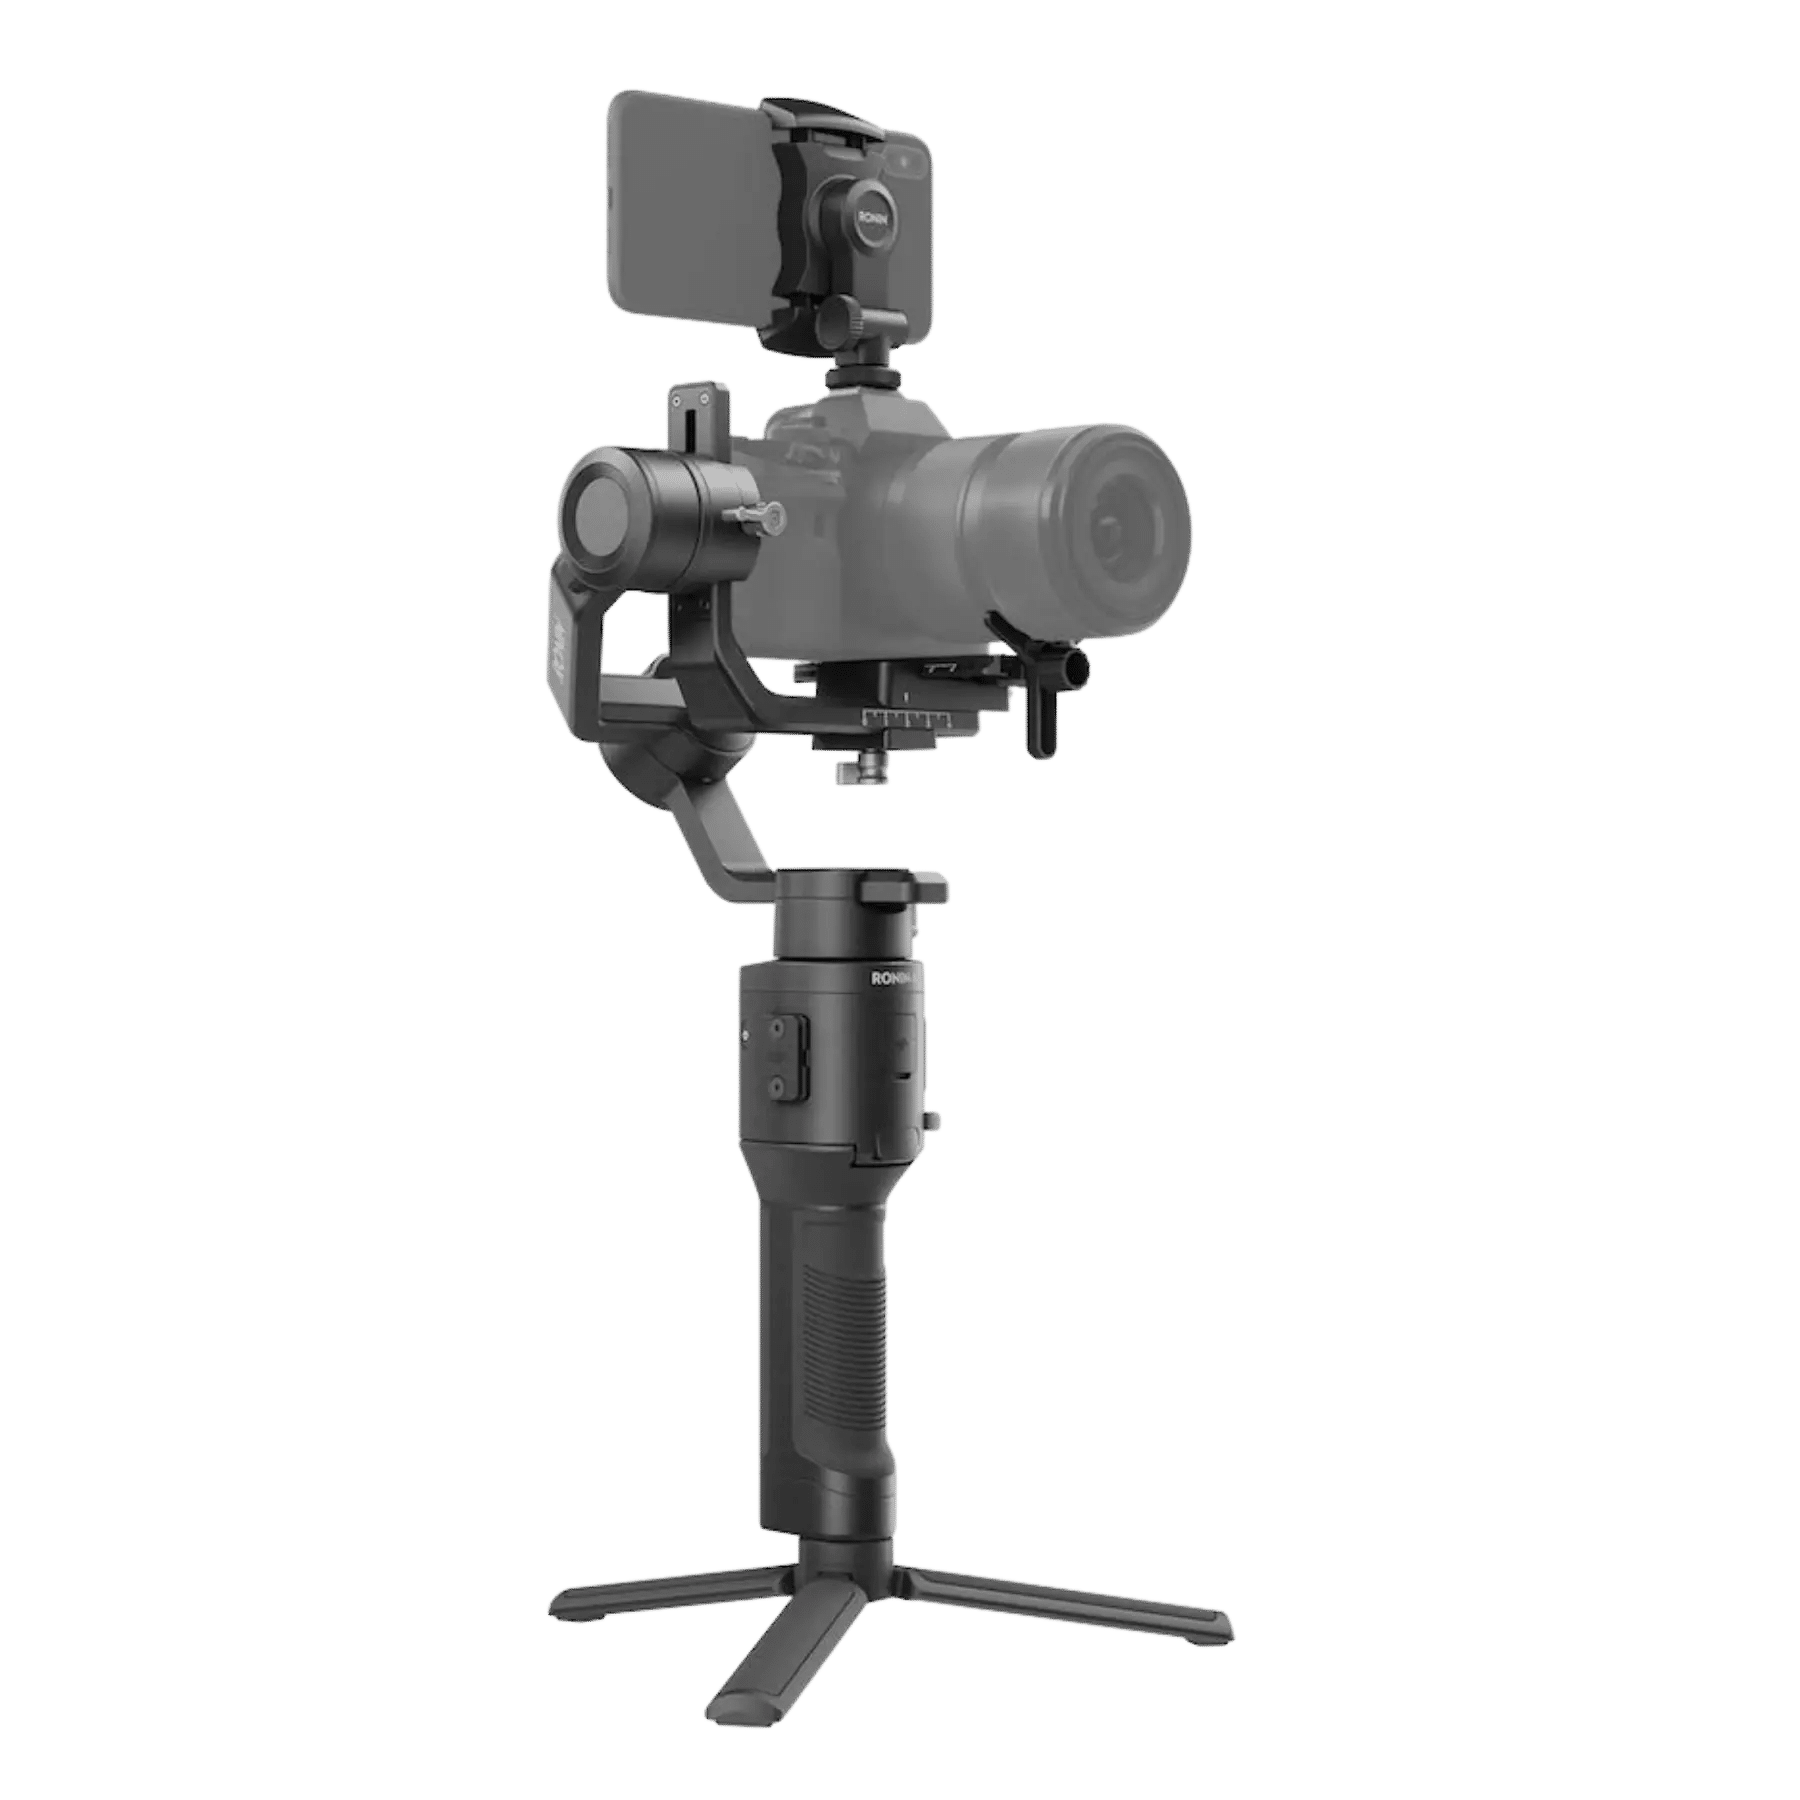 These are product images of DJI Ronin SC Gimbal on rent by SharePal.